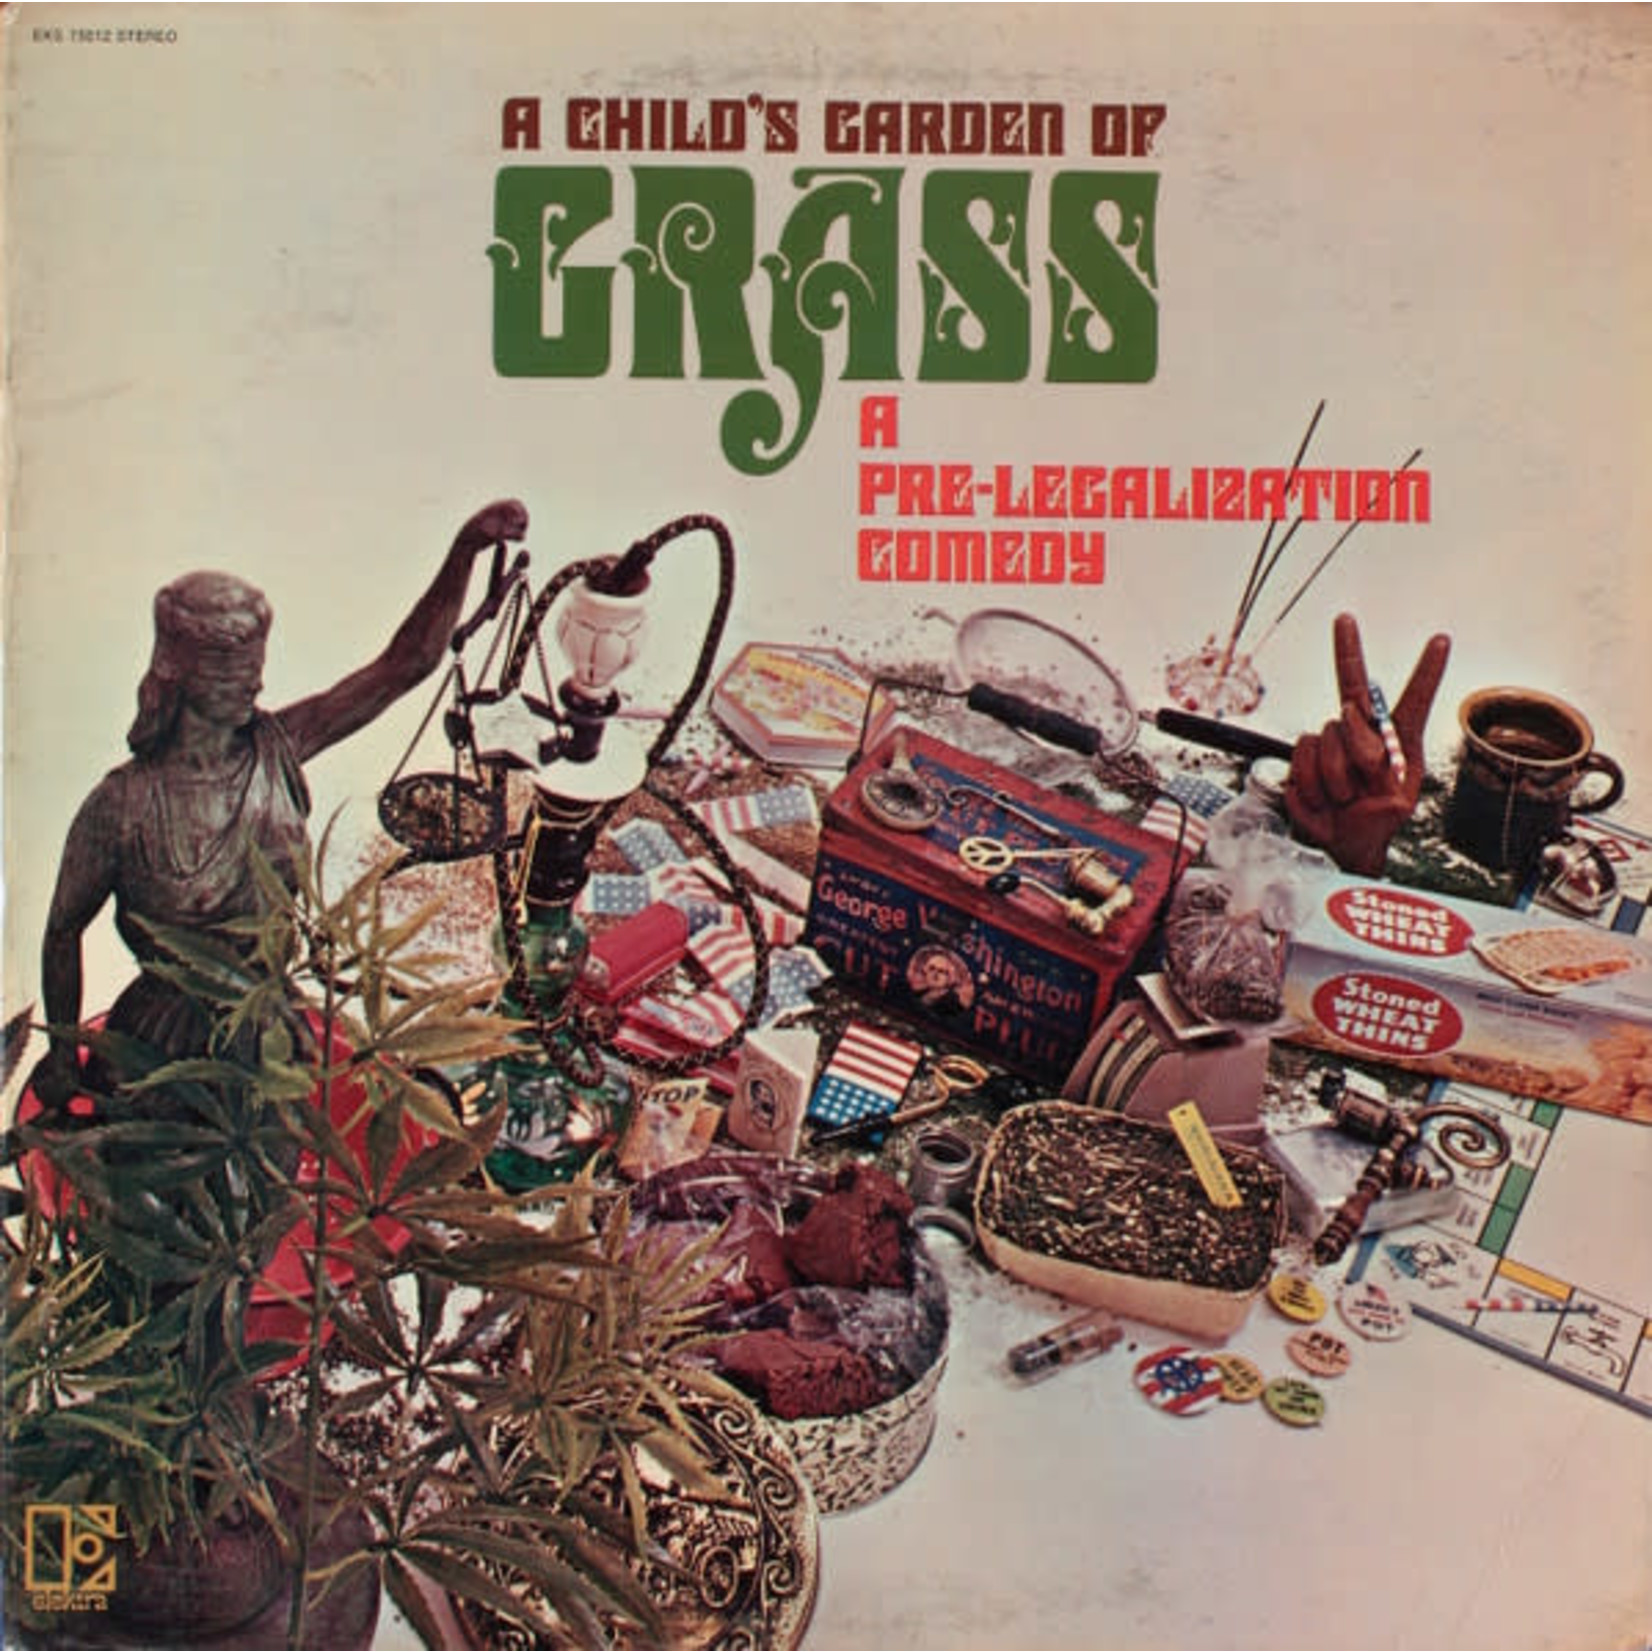 [Vintage] Various Artists - A Child's Garden of Grass - A Pre-Legalization Comedy